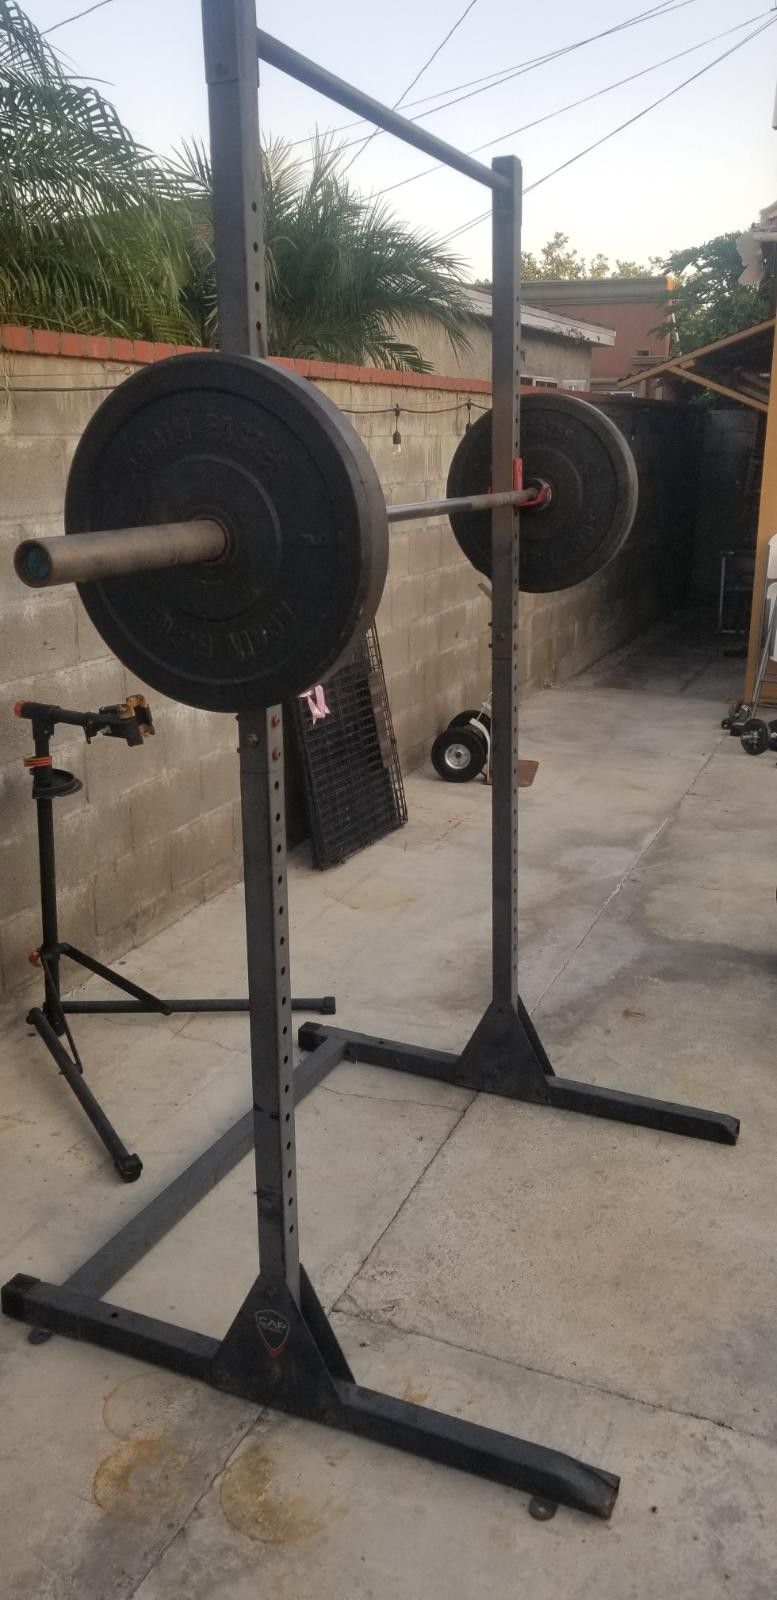 Weight barbell